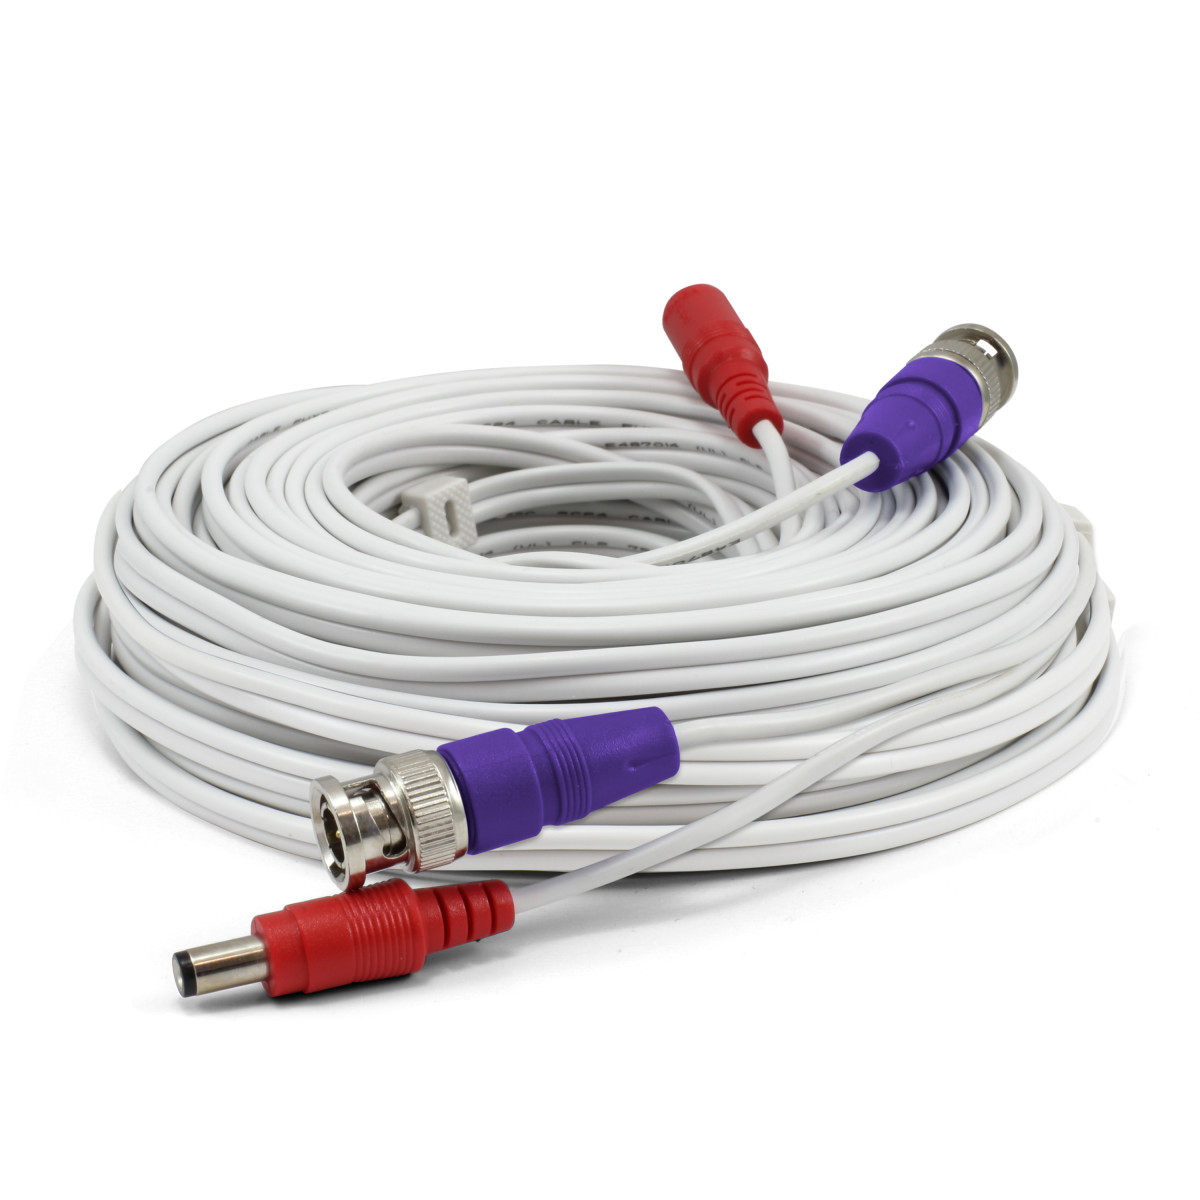 EUK-UL 15m / 50ft BNC Extension Cable